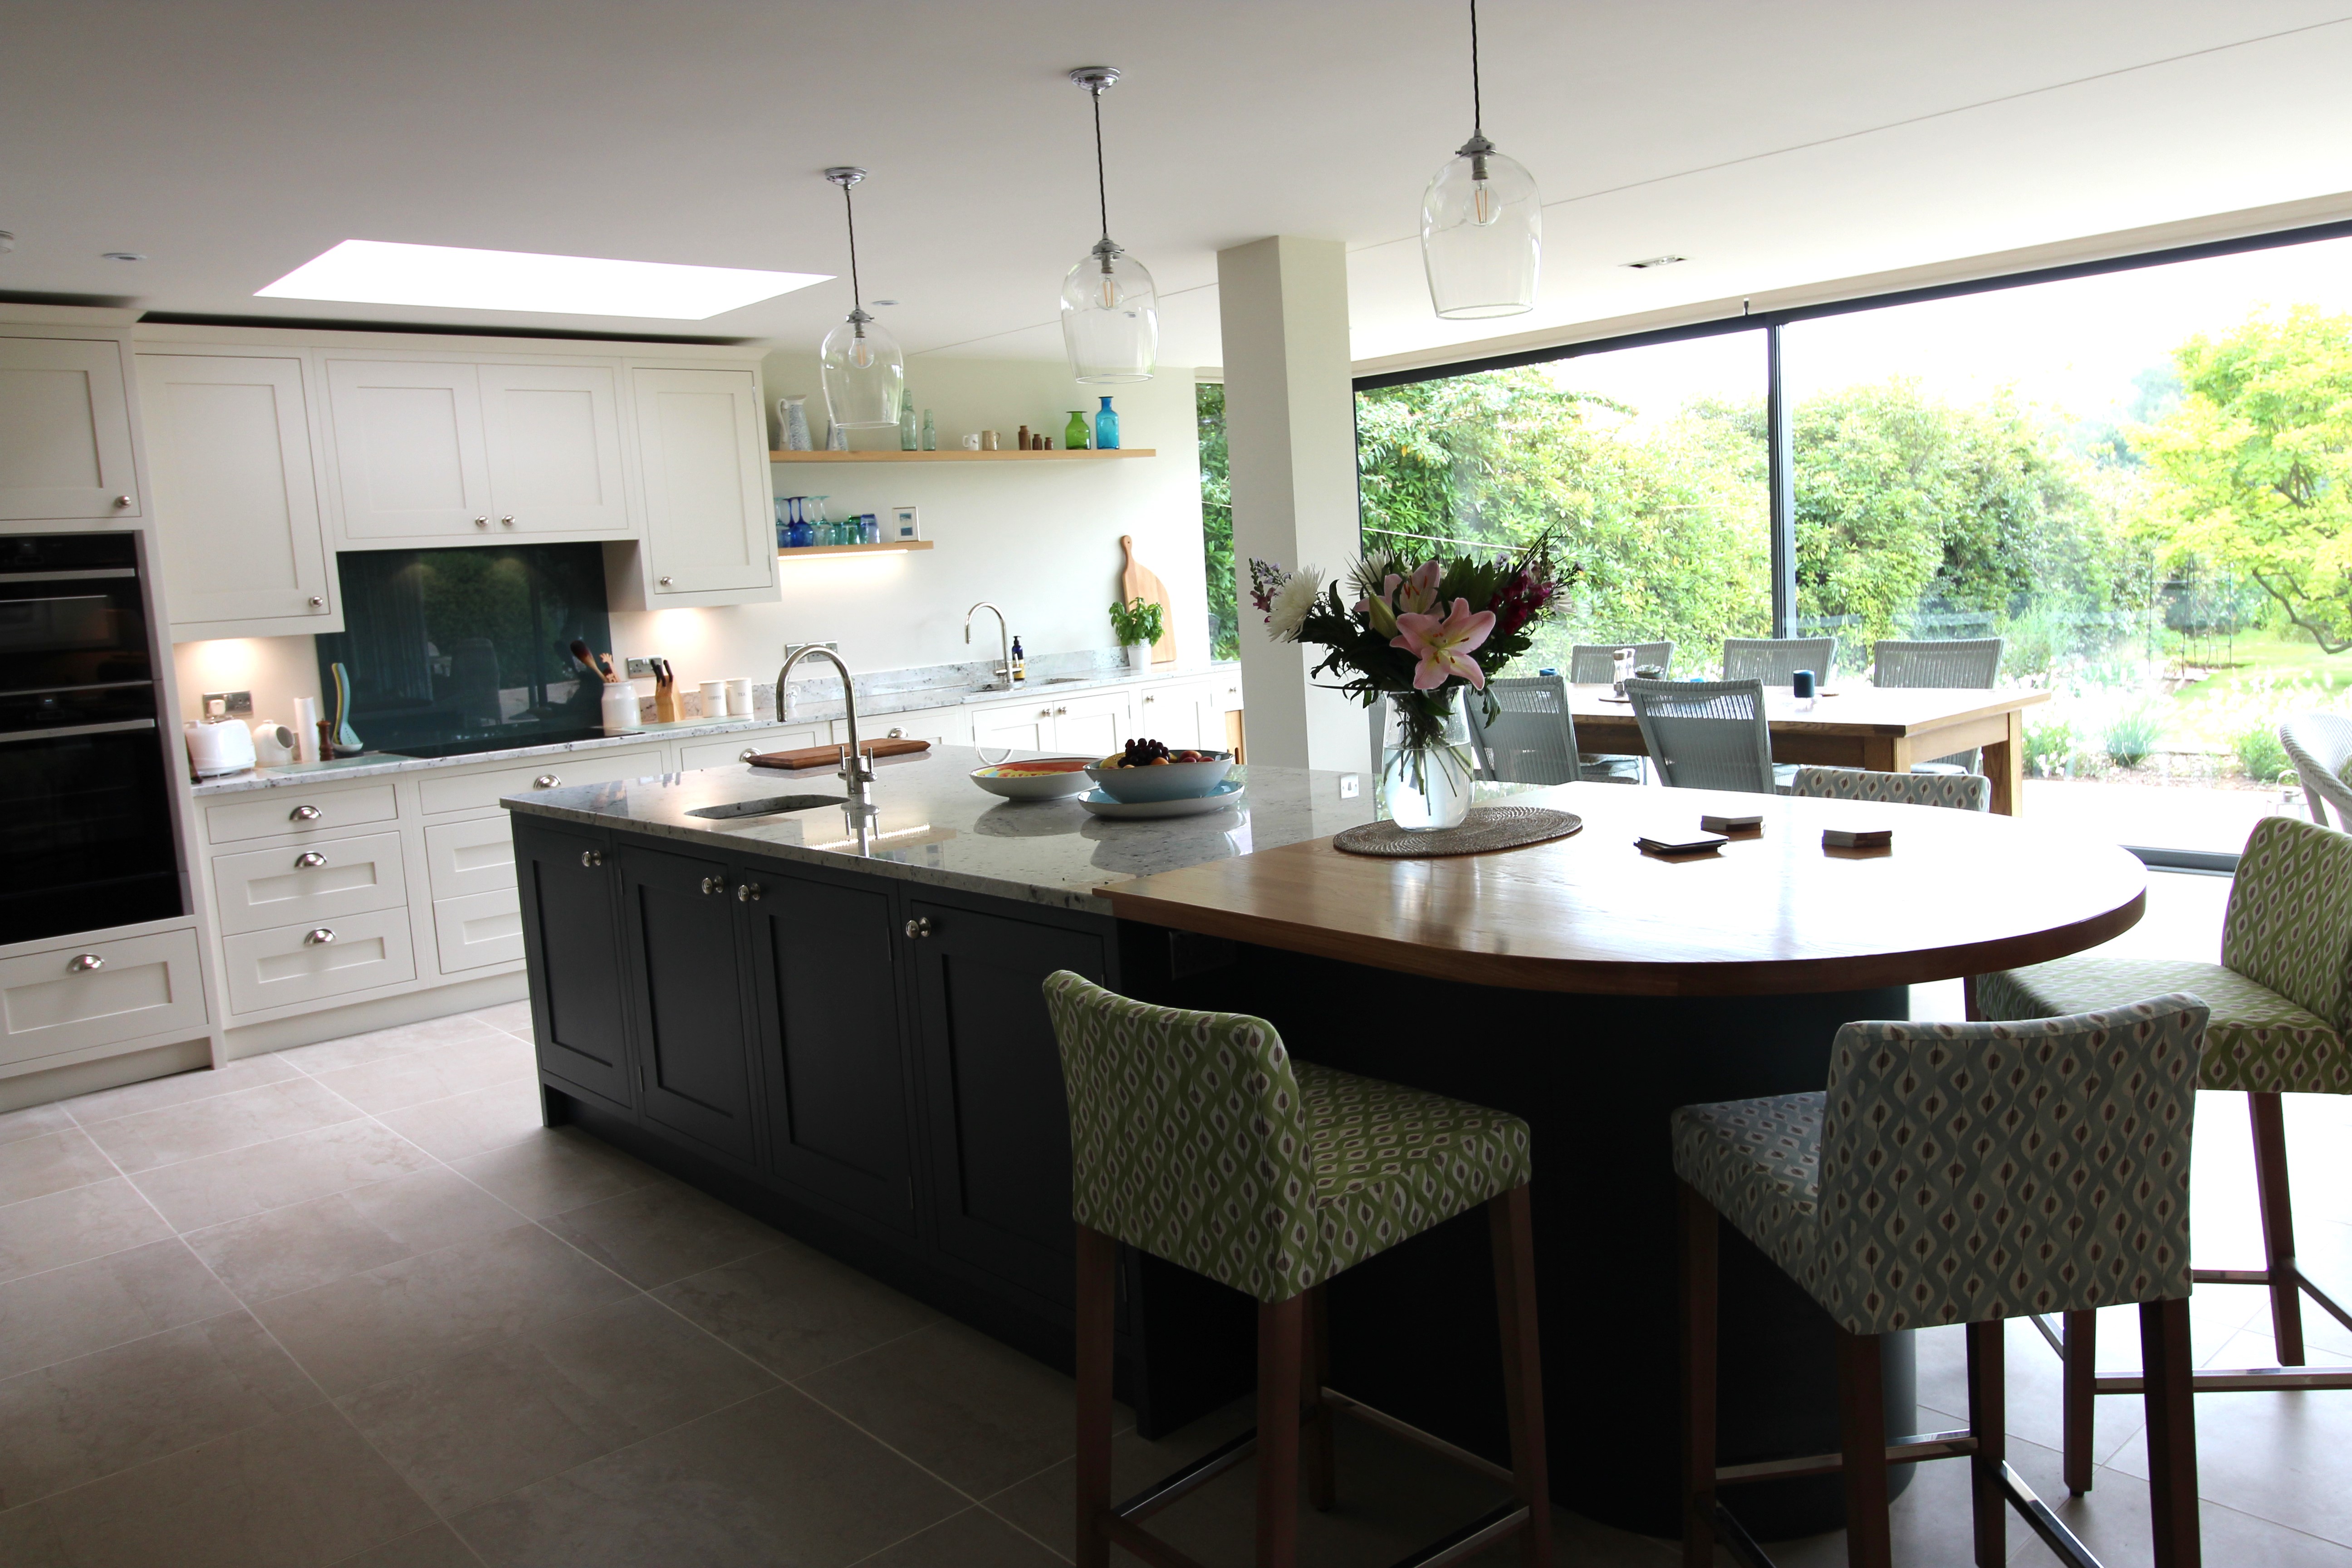 A dual surface for the island worktop creates a stunning breakfast bar in this classic Shaker kitchen.